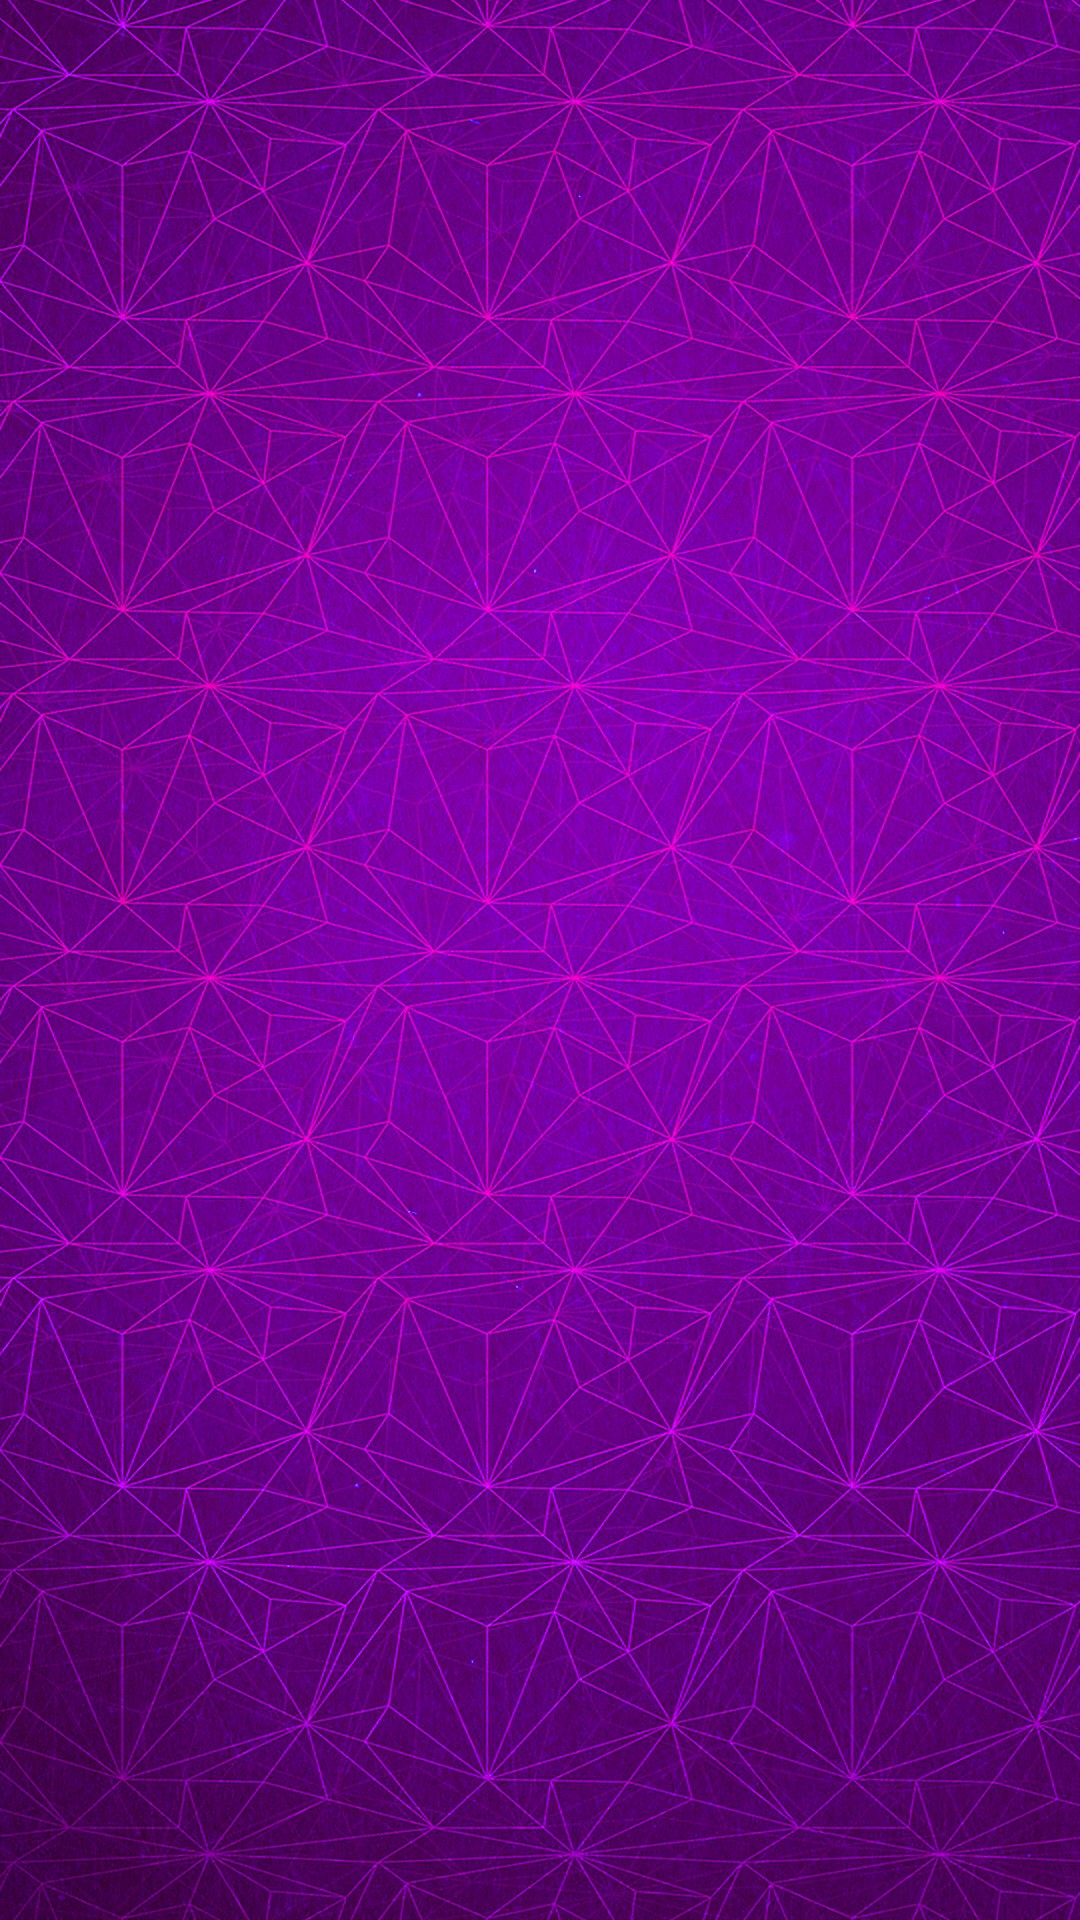 Cool Purple iPhone Wallpaper Tumblr with high-resolution 1080x1920 pixel. You can set as wallpaper for Apple iPhone X, XS Max, XR, 8, 7, 6, SE, iPad. Enjoy and share your favorite HD wallpapers and background images